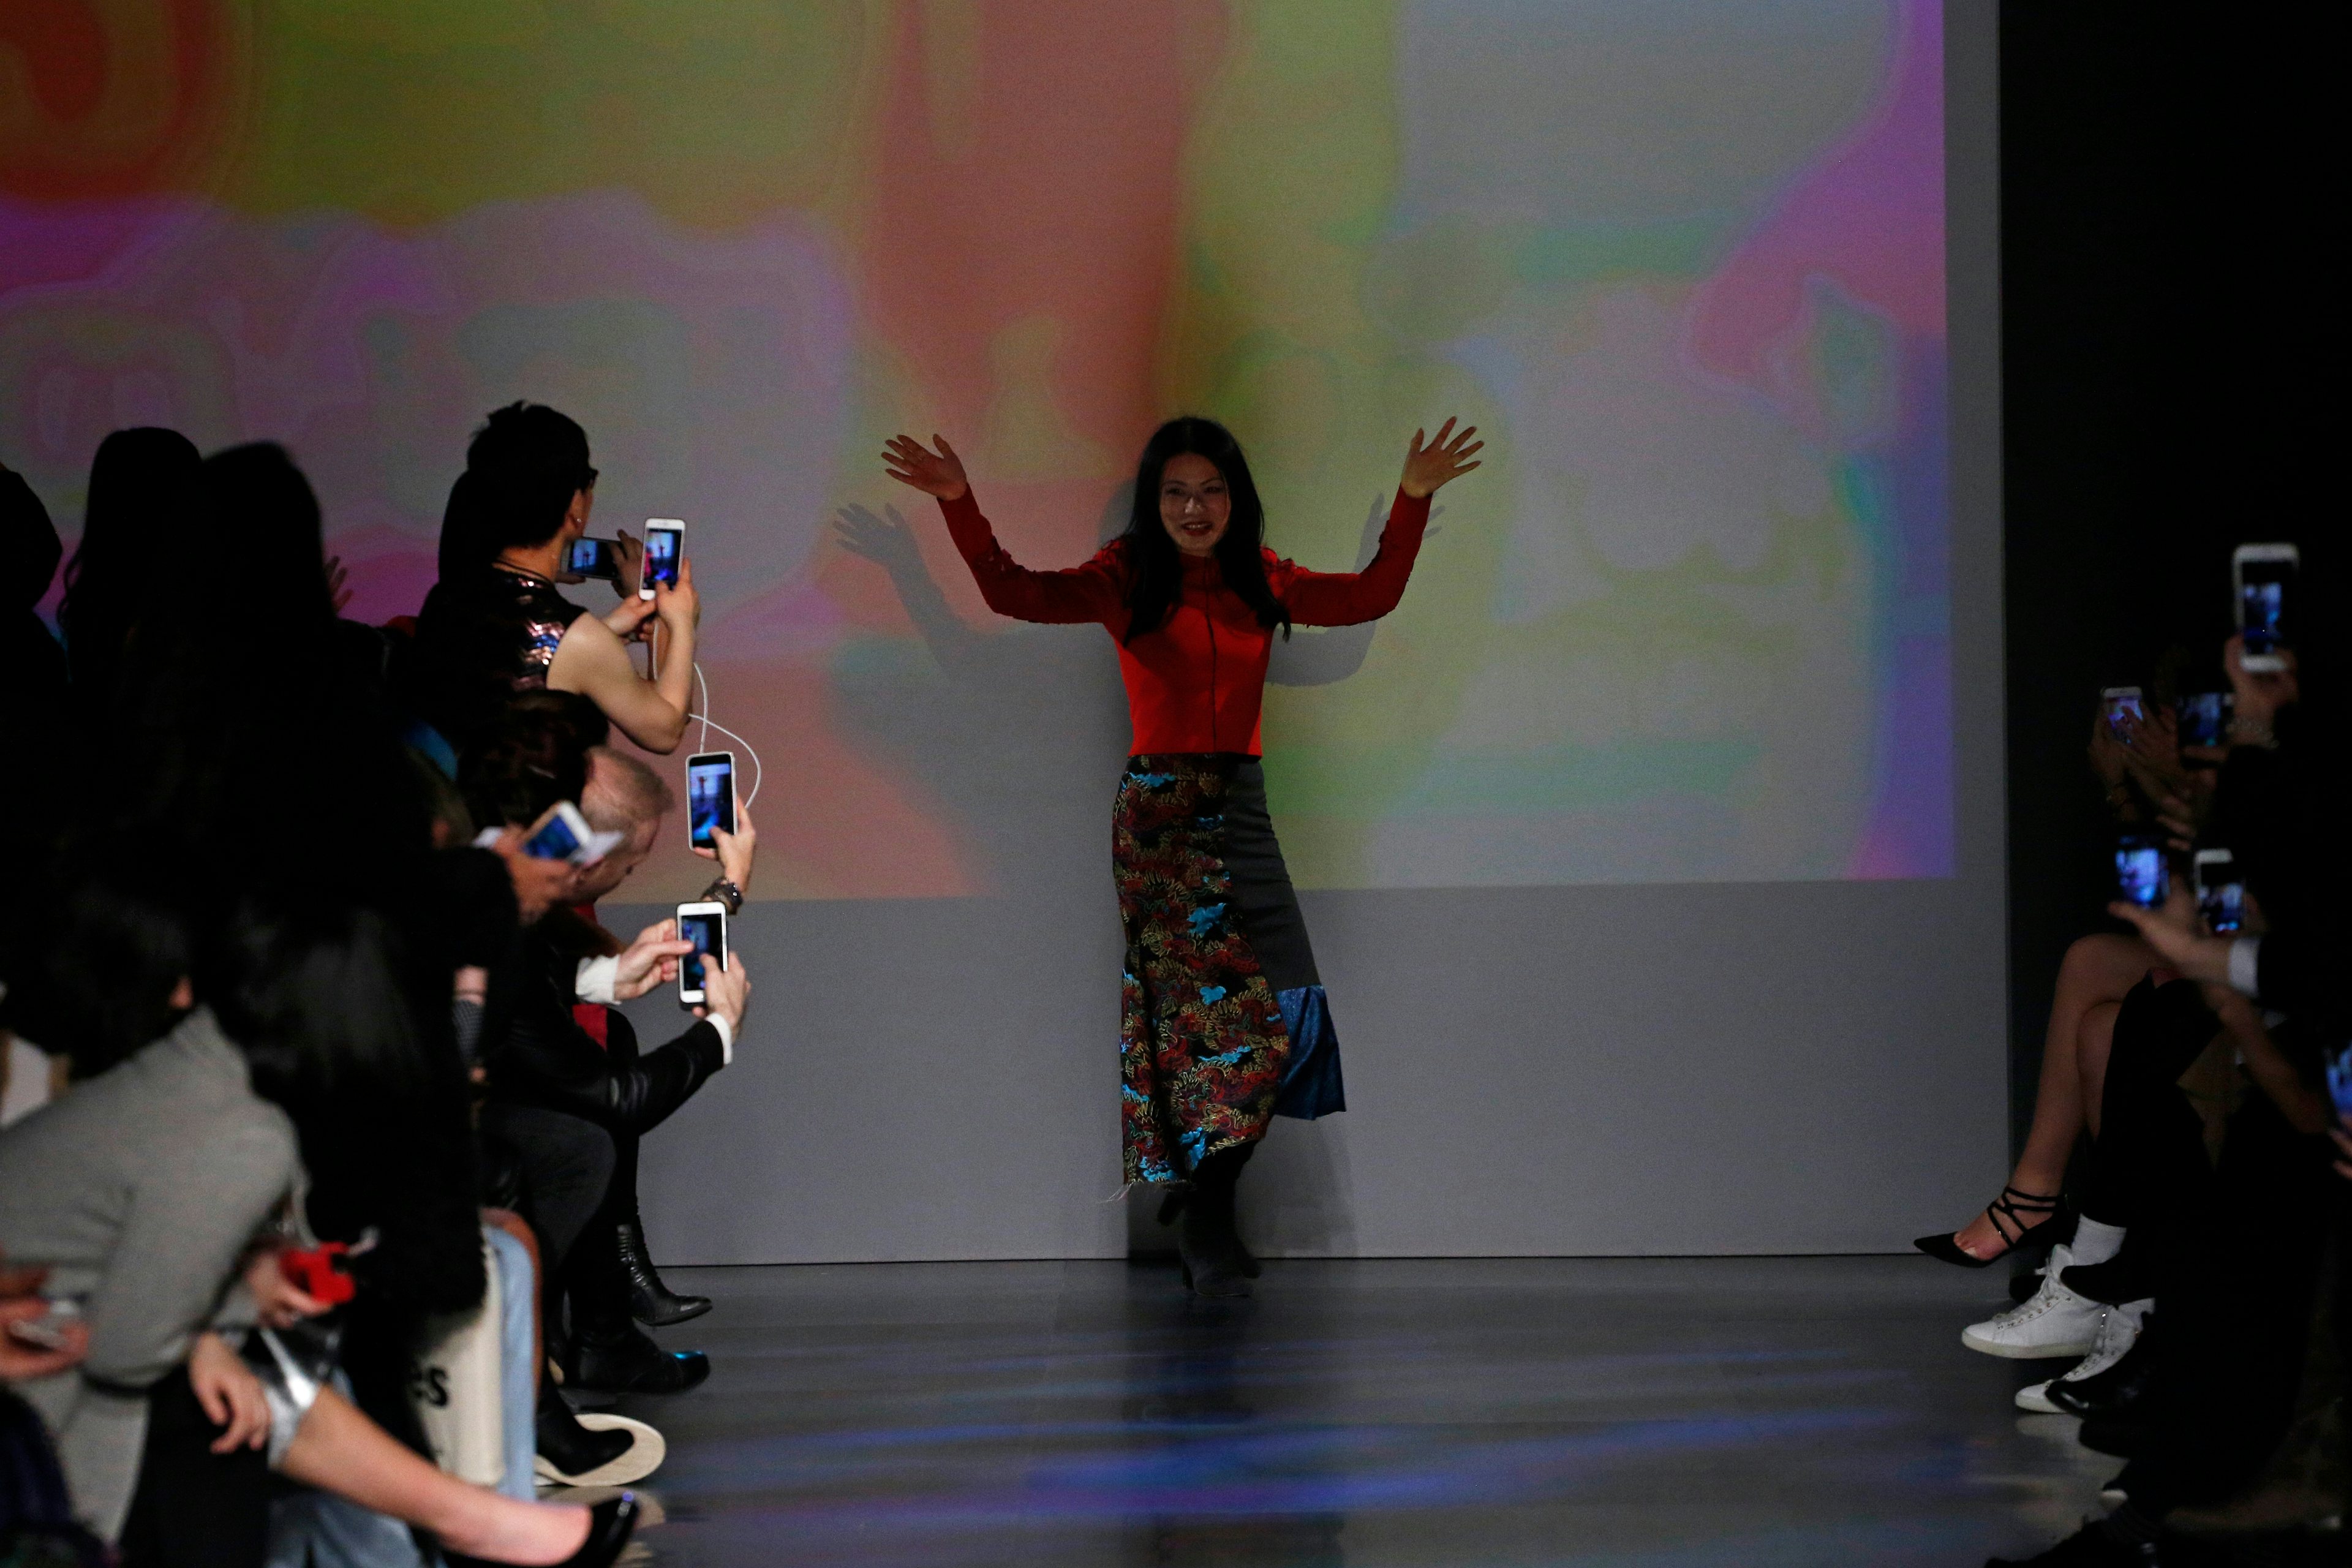 Fashion designer Vivienne Tam came out to greet the audience at the end of the show. (Courtesy Photo)